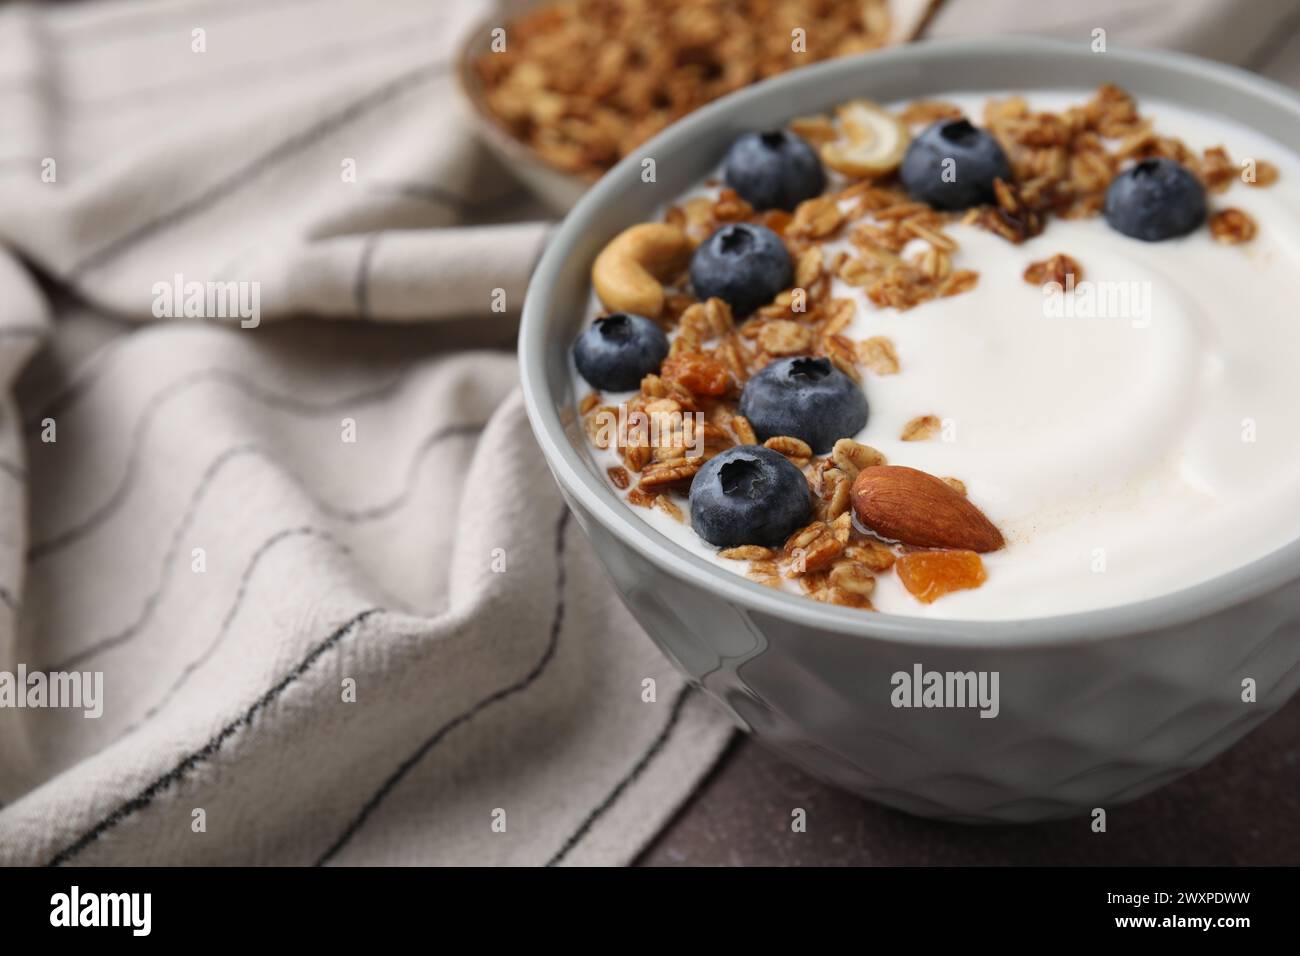 Bowl with yogurt, blueberries and granola on grey table, closeup Stock Photo